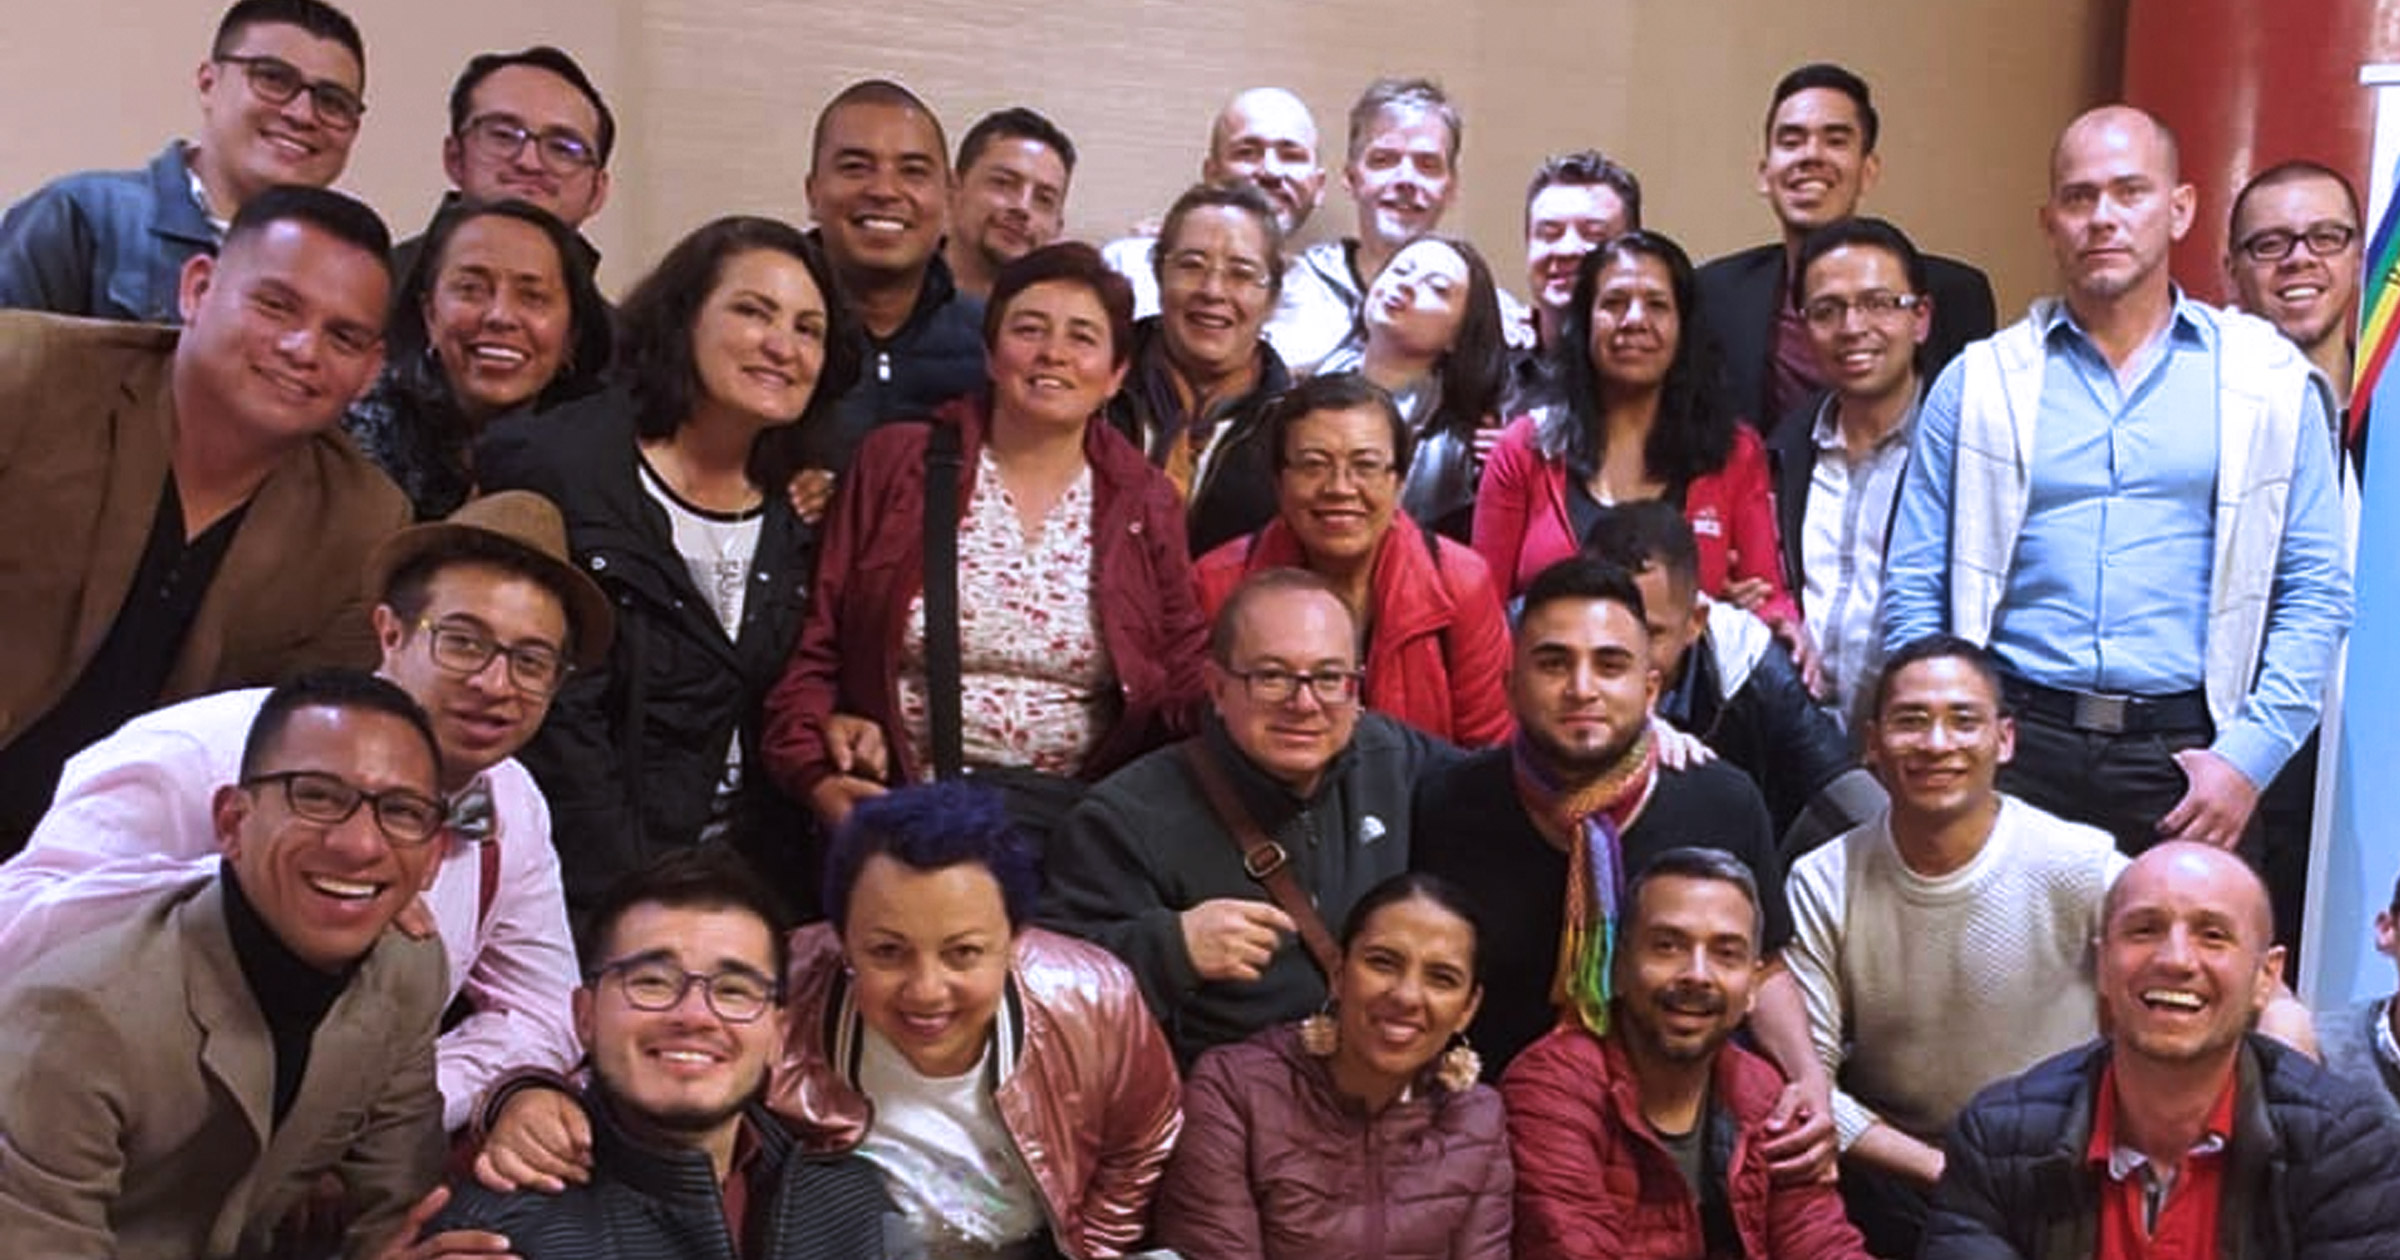 2019 Affirmation Colombia Conference